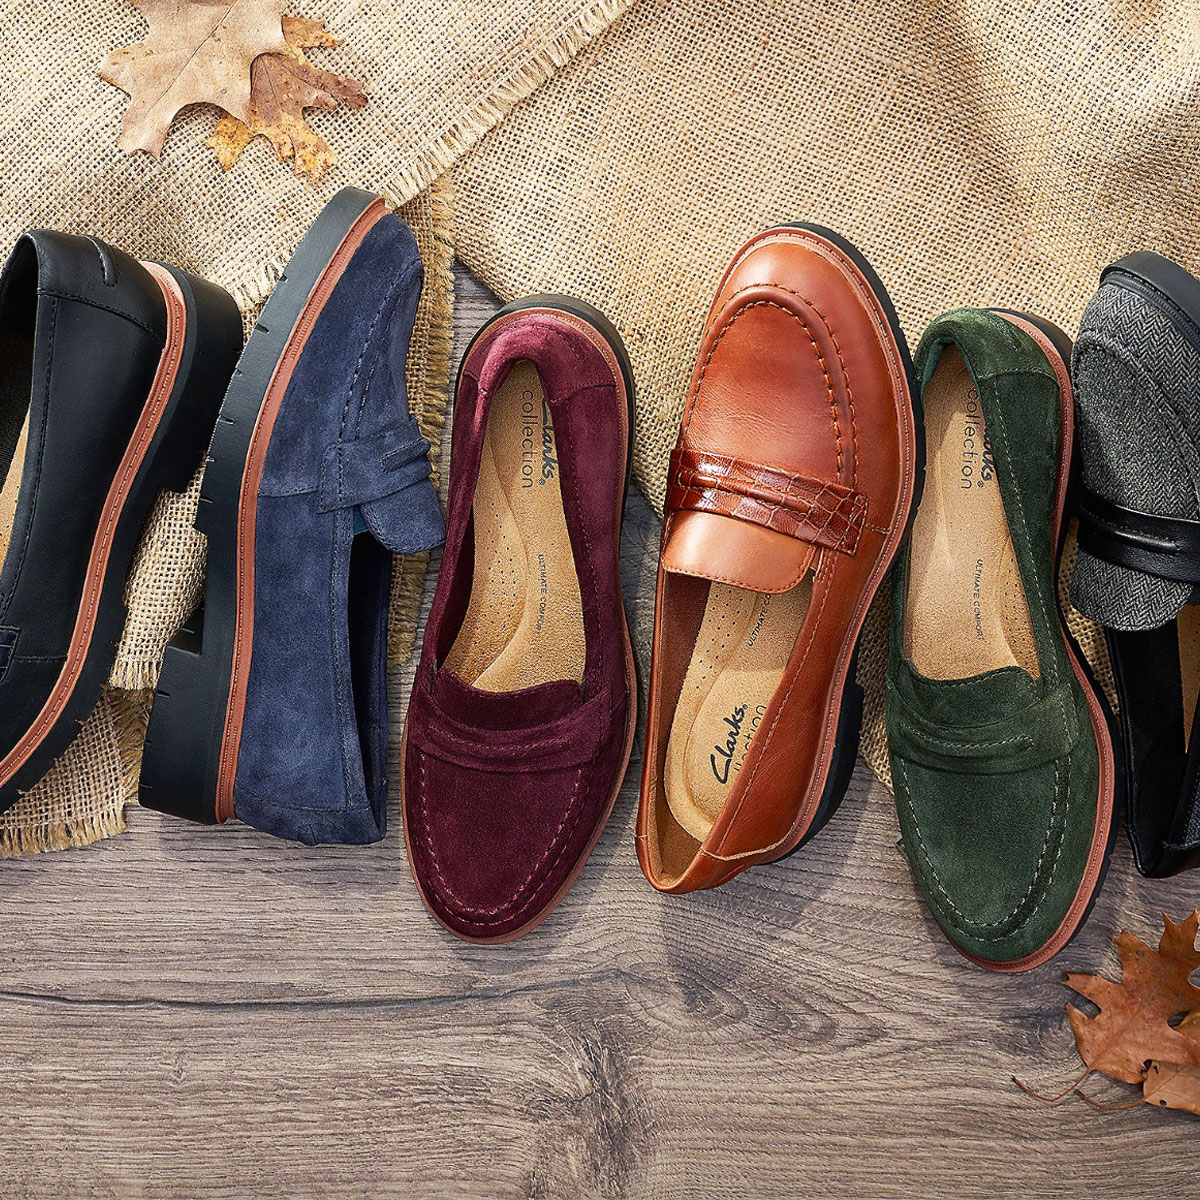 Loafers in Shoes for Women